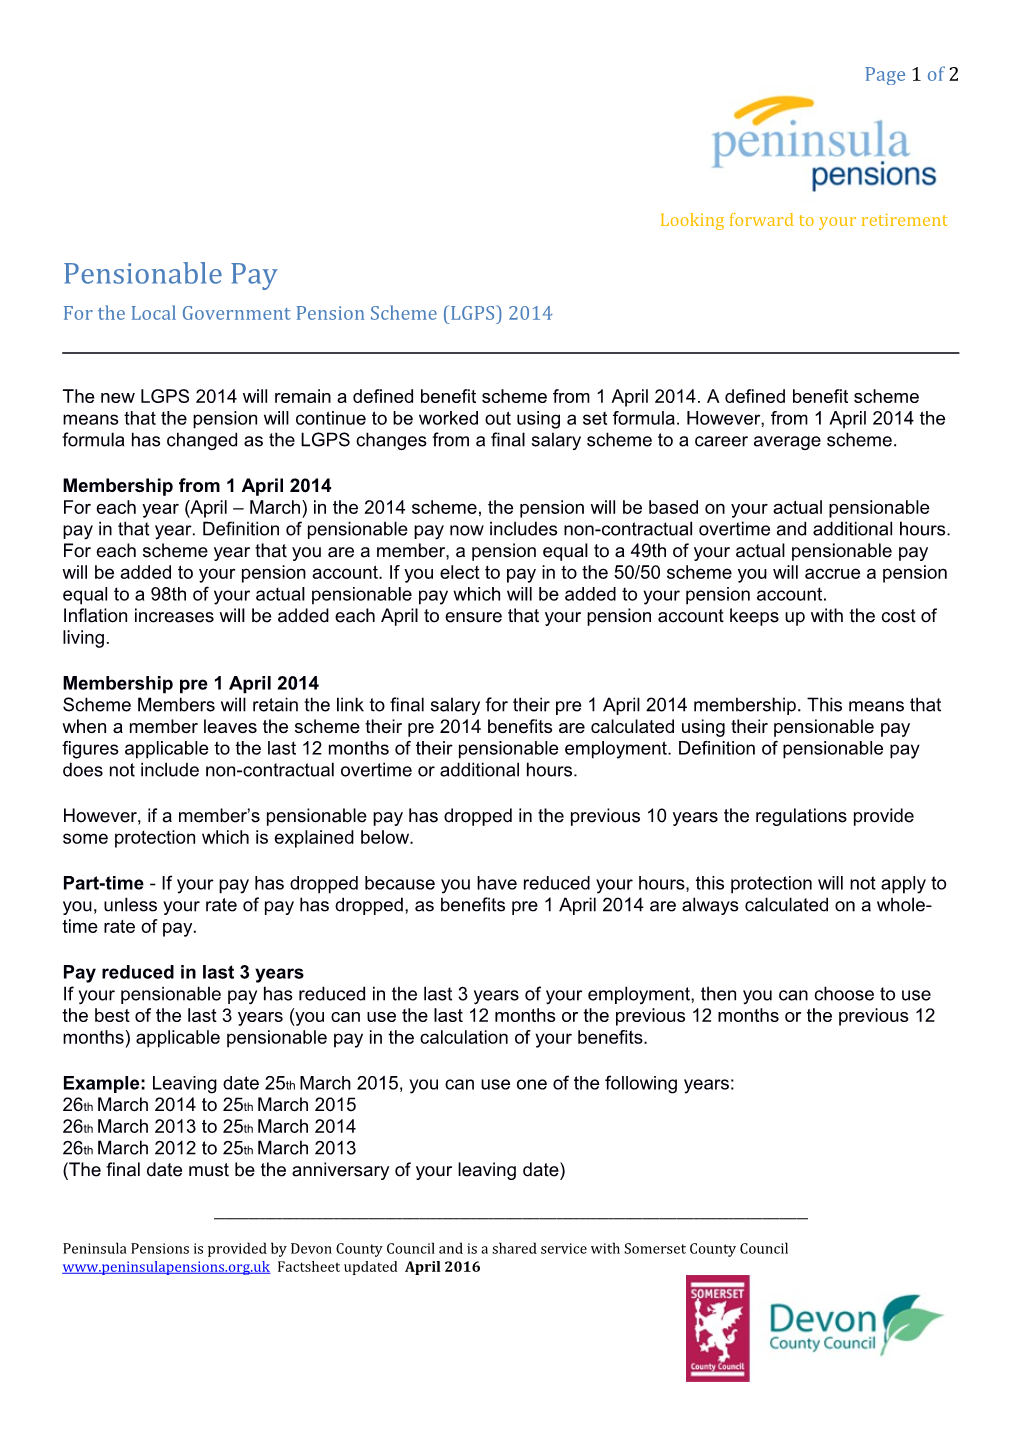 Pensionable Pay for the Local Government Pension Scheme (LGPS) 2014